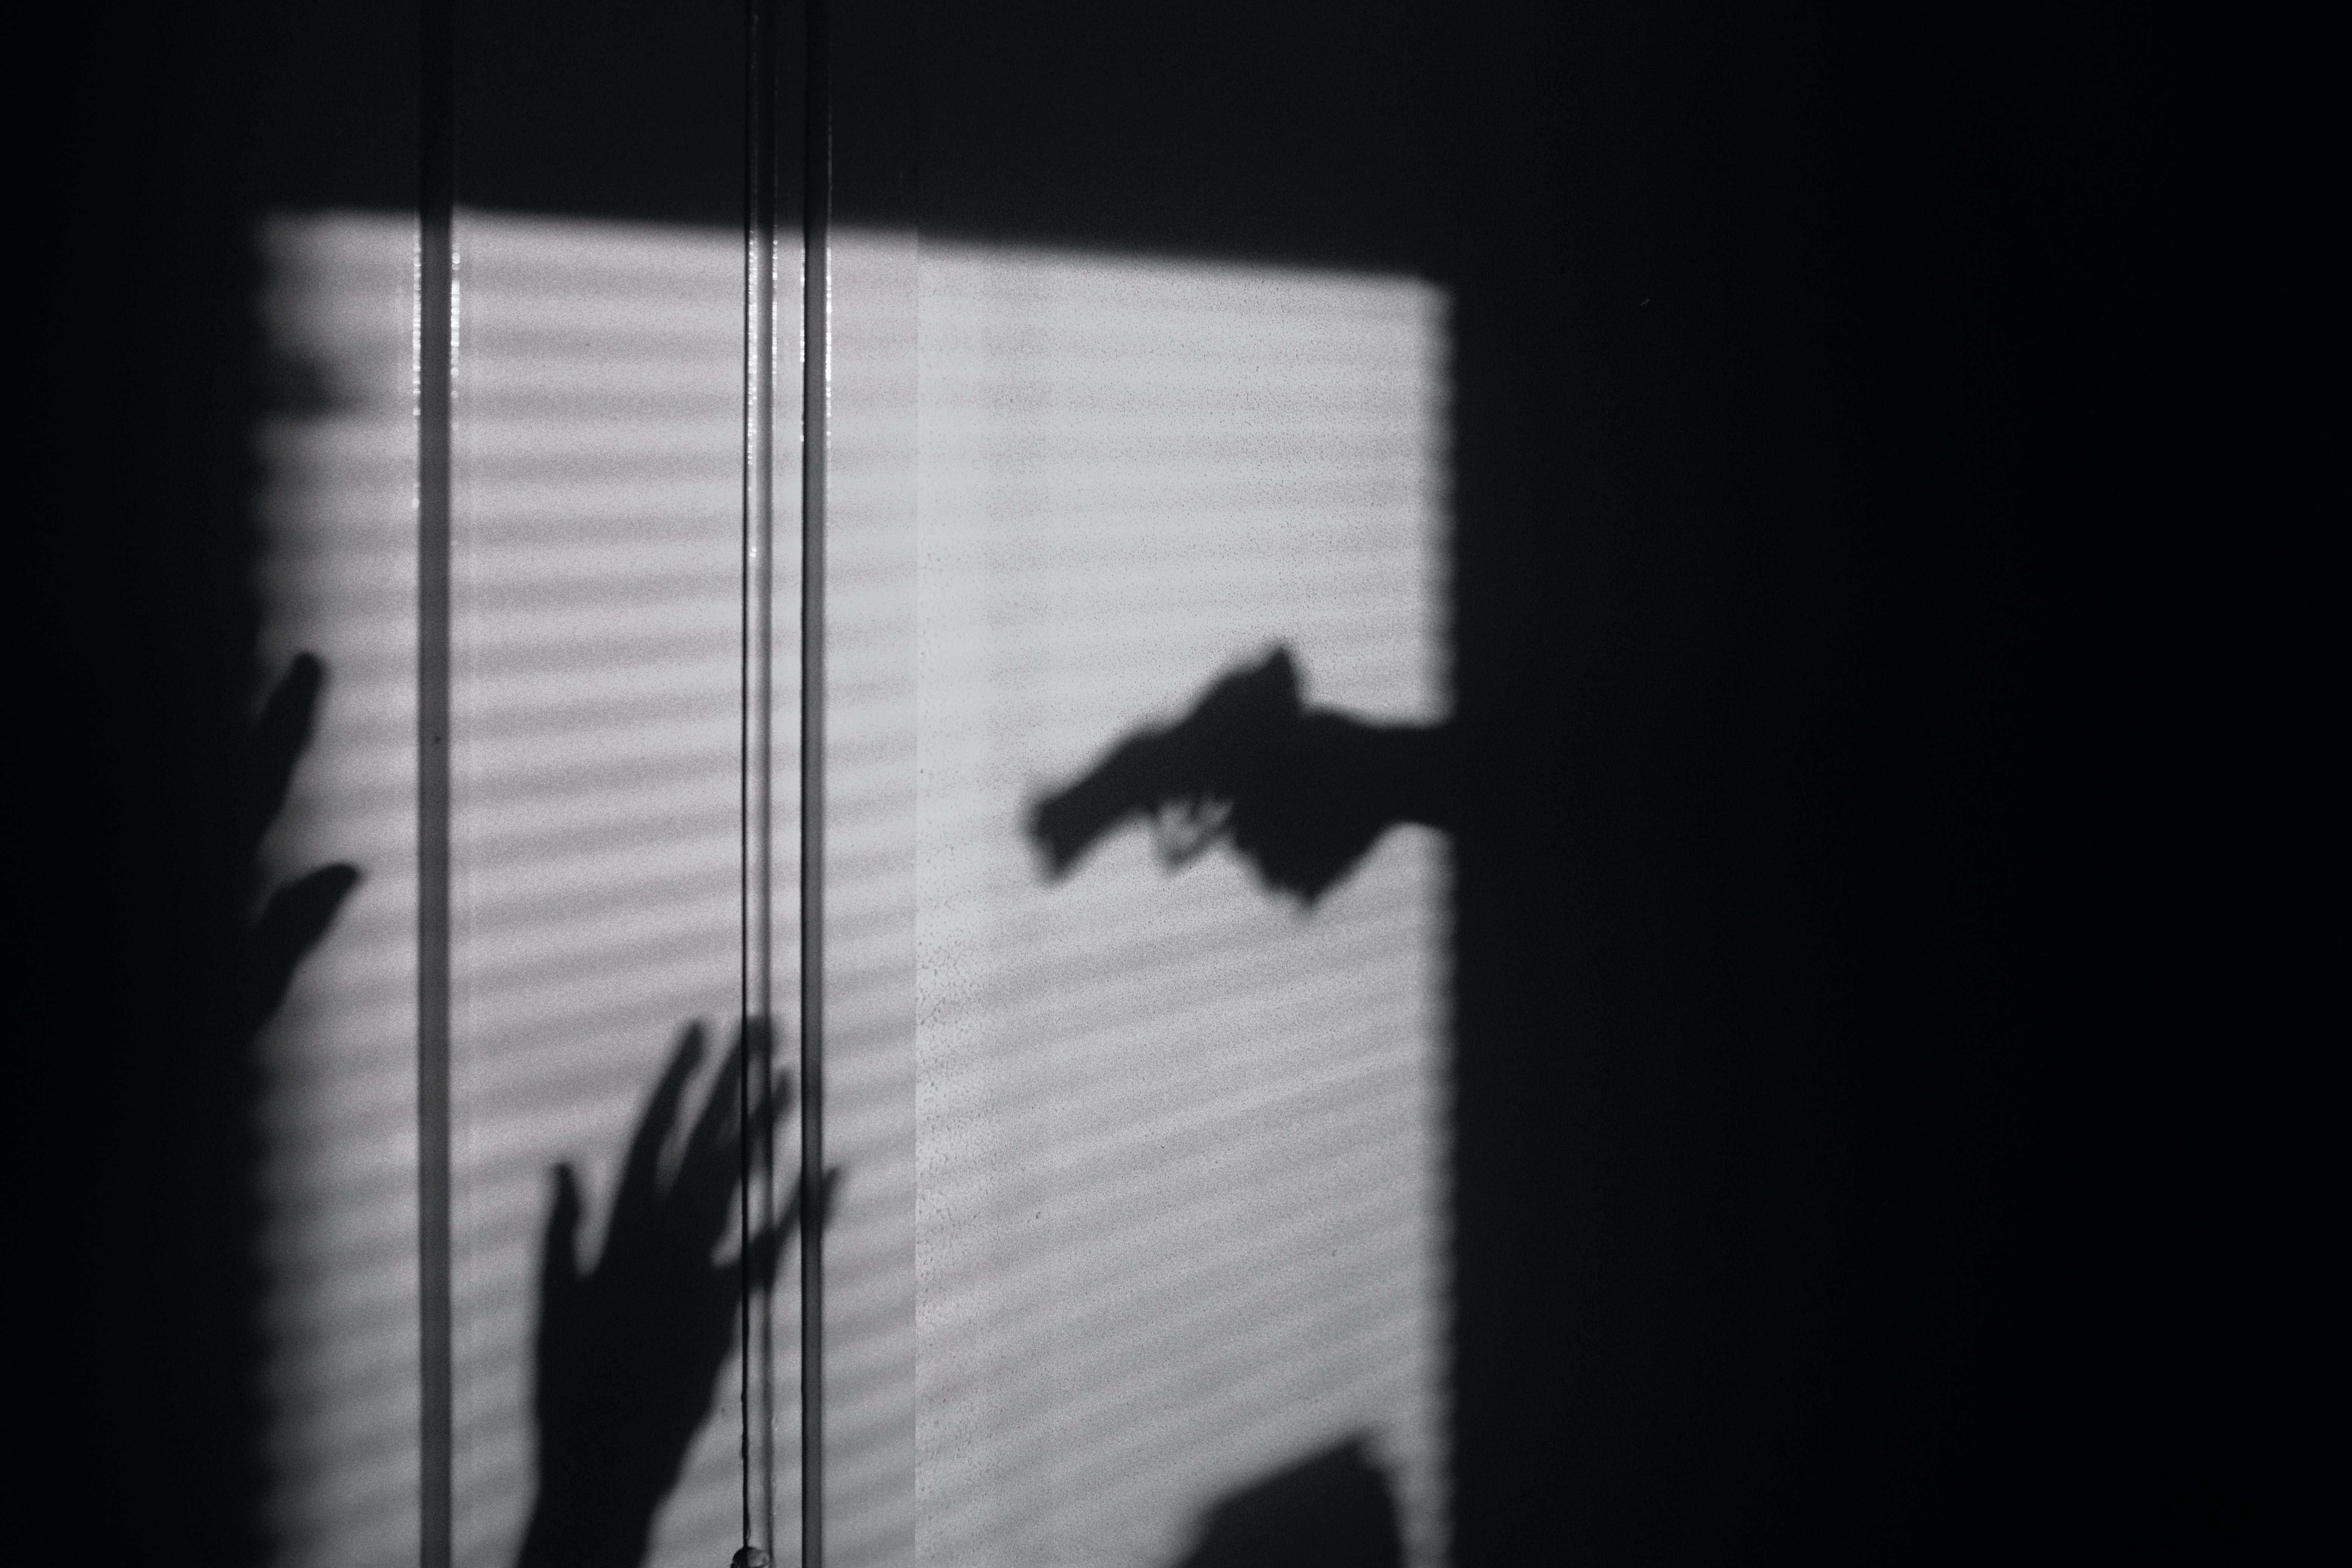 Shadow on a home wall showing a gun pointed at a person with raised hands